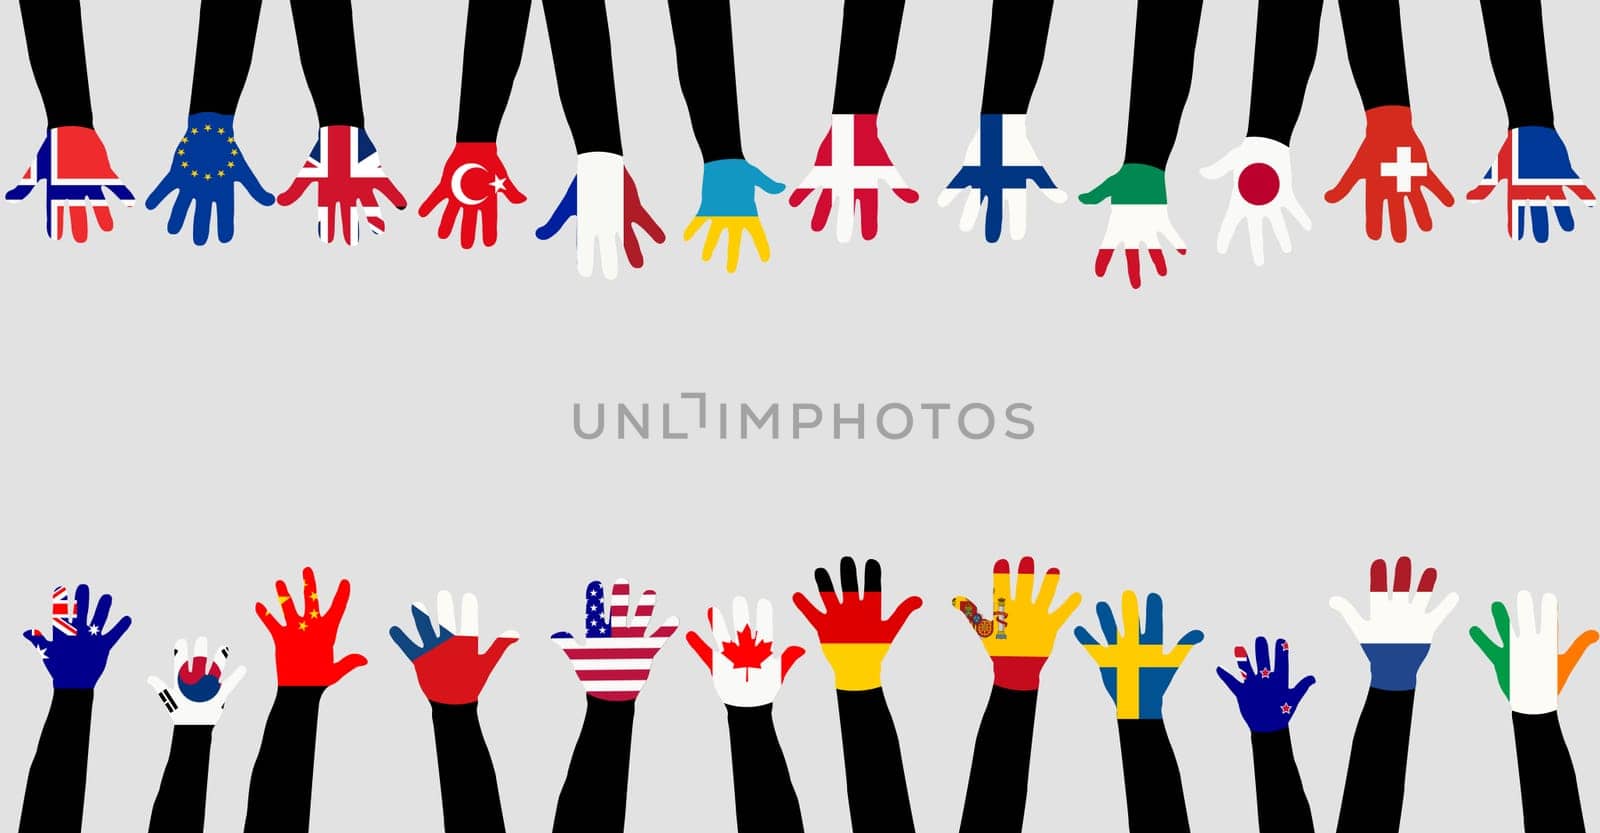 Children's hands painted in the colors of the world flags by hibrida13